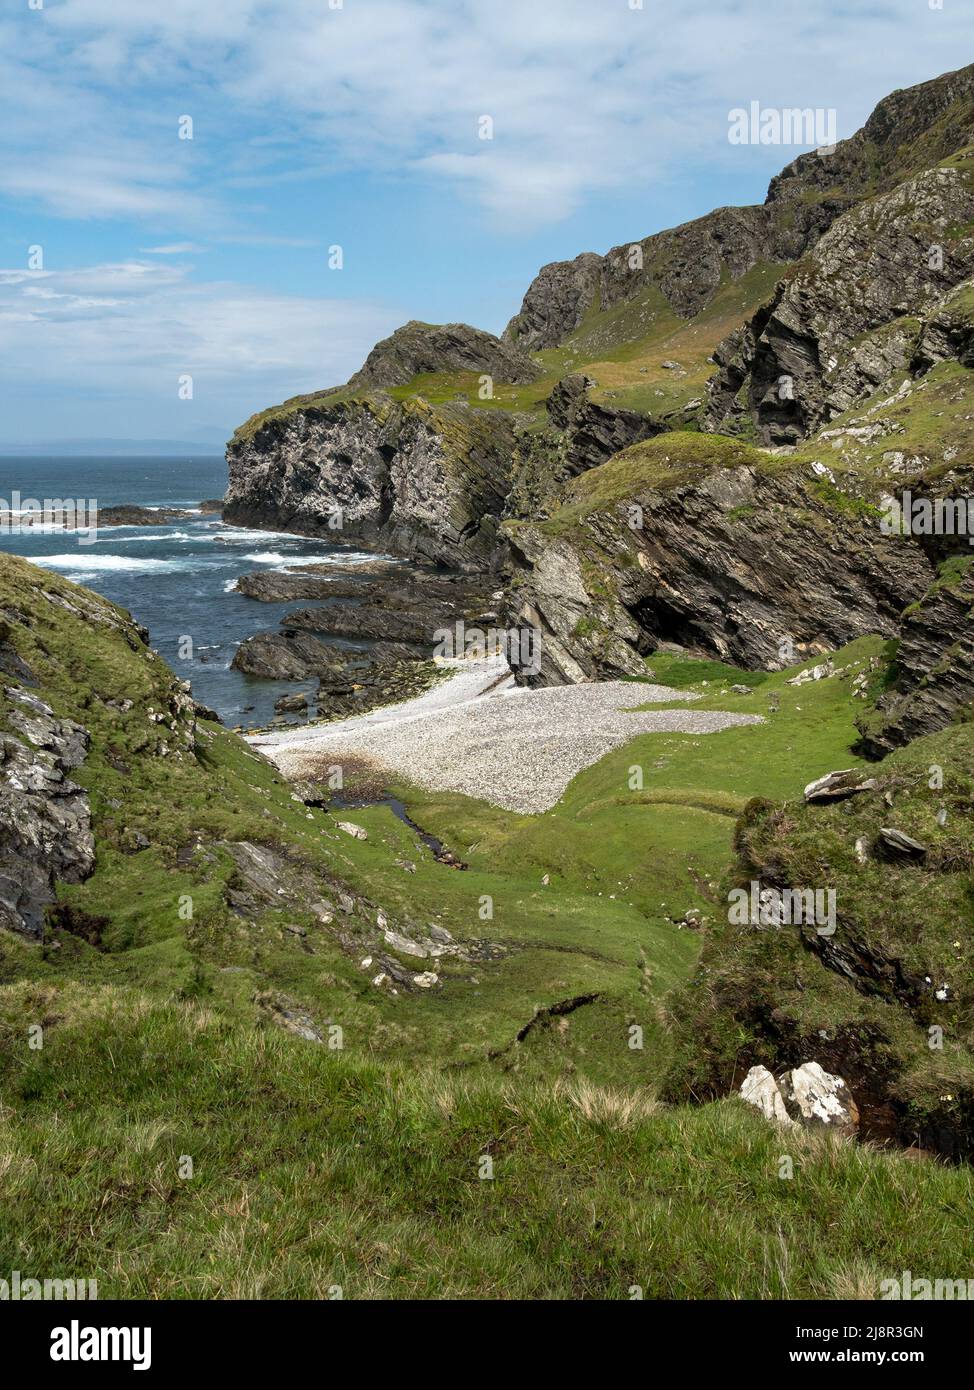 Sea cliffs and pebble beach at Port Ban near Pigs Paradise on the Hebridean Island of Colonsay, Scotland, UK Stock Photo